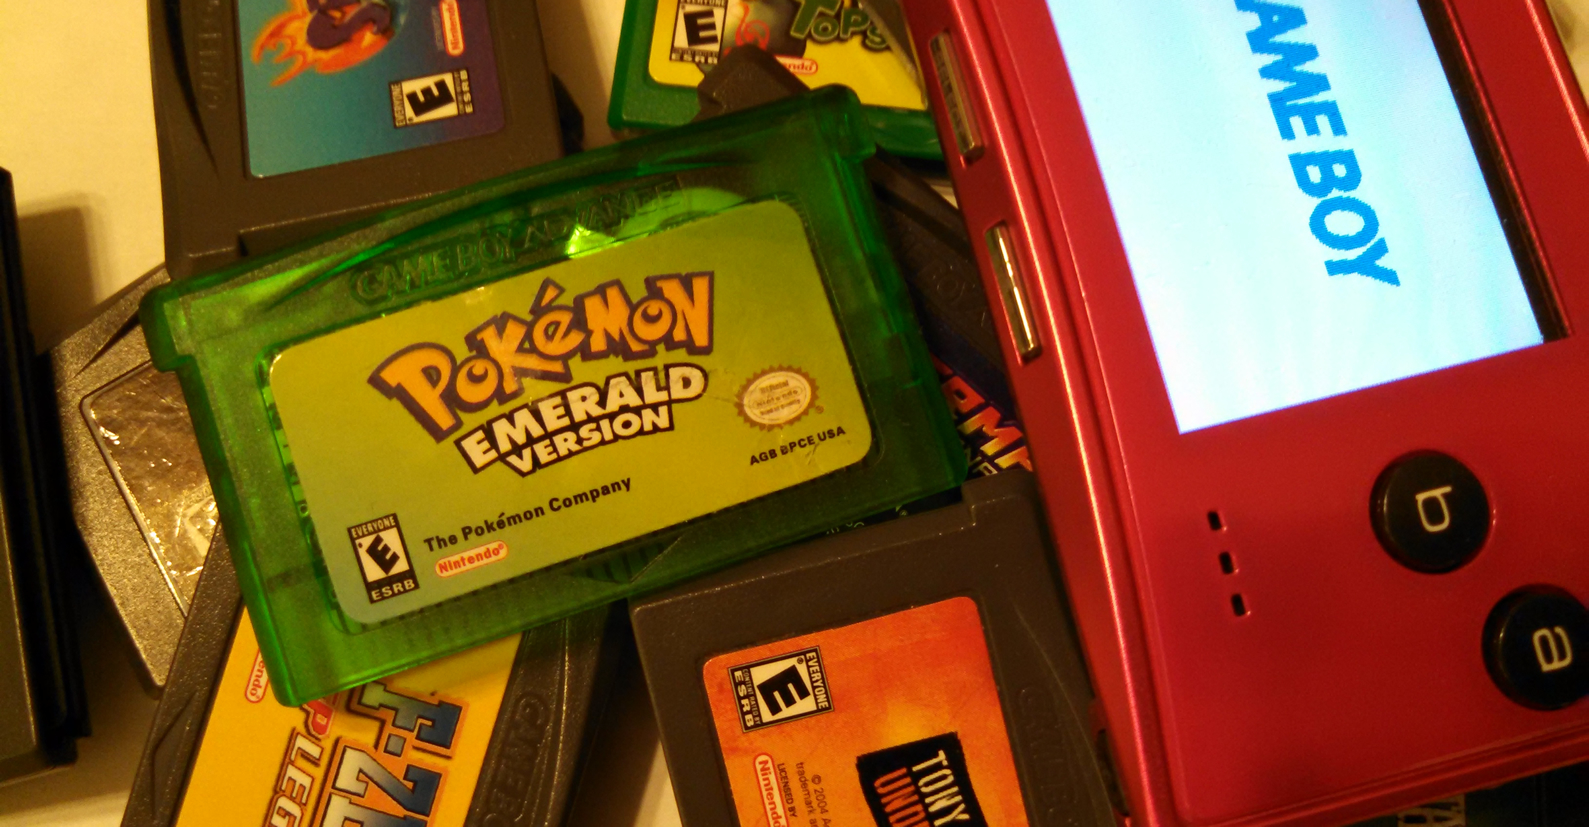 where to buy authentic pokemon games